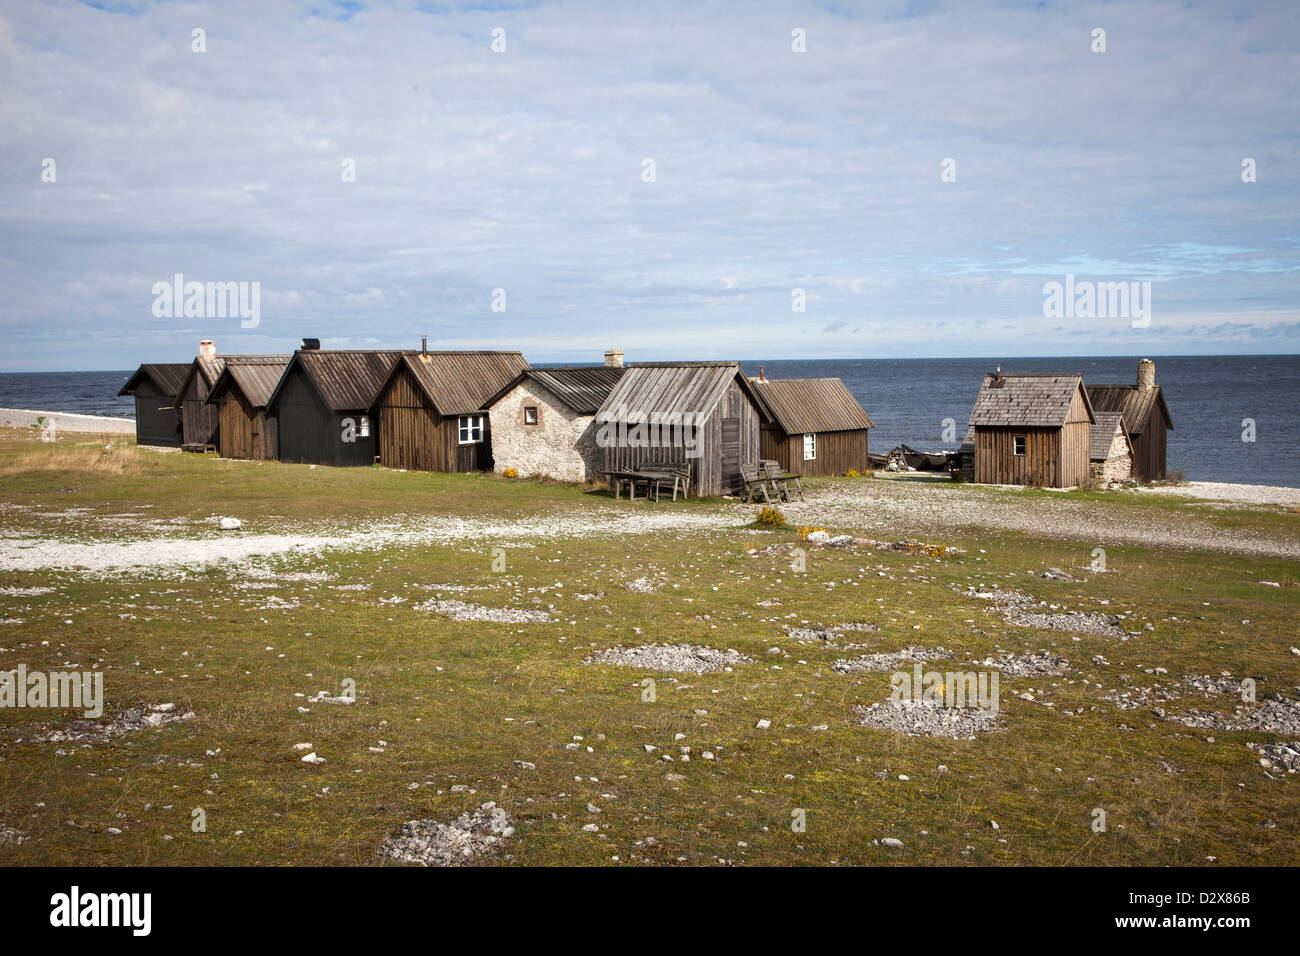 At Fårö, an island at Gotland, Sweden, there is a very old, small villsge of fishermens cabins. This is called Helgumannen. Stock Photo